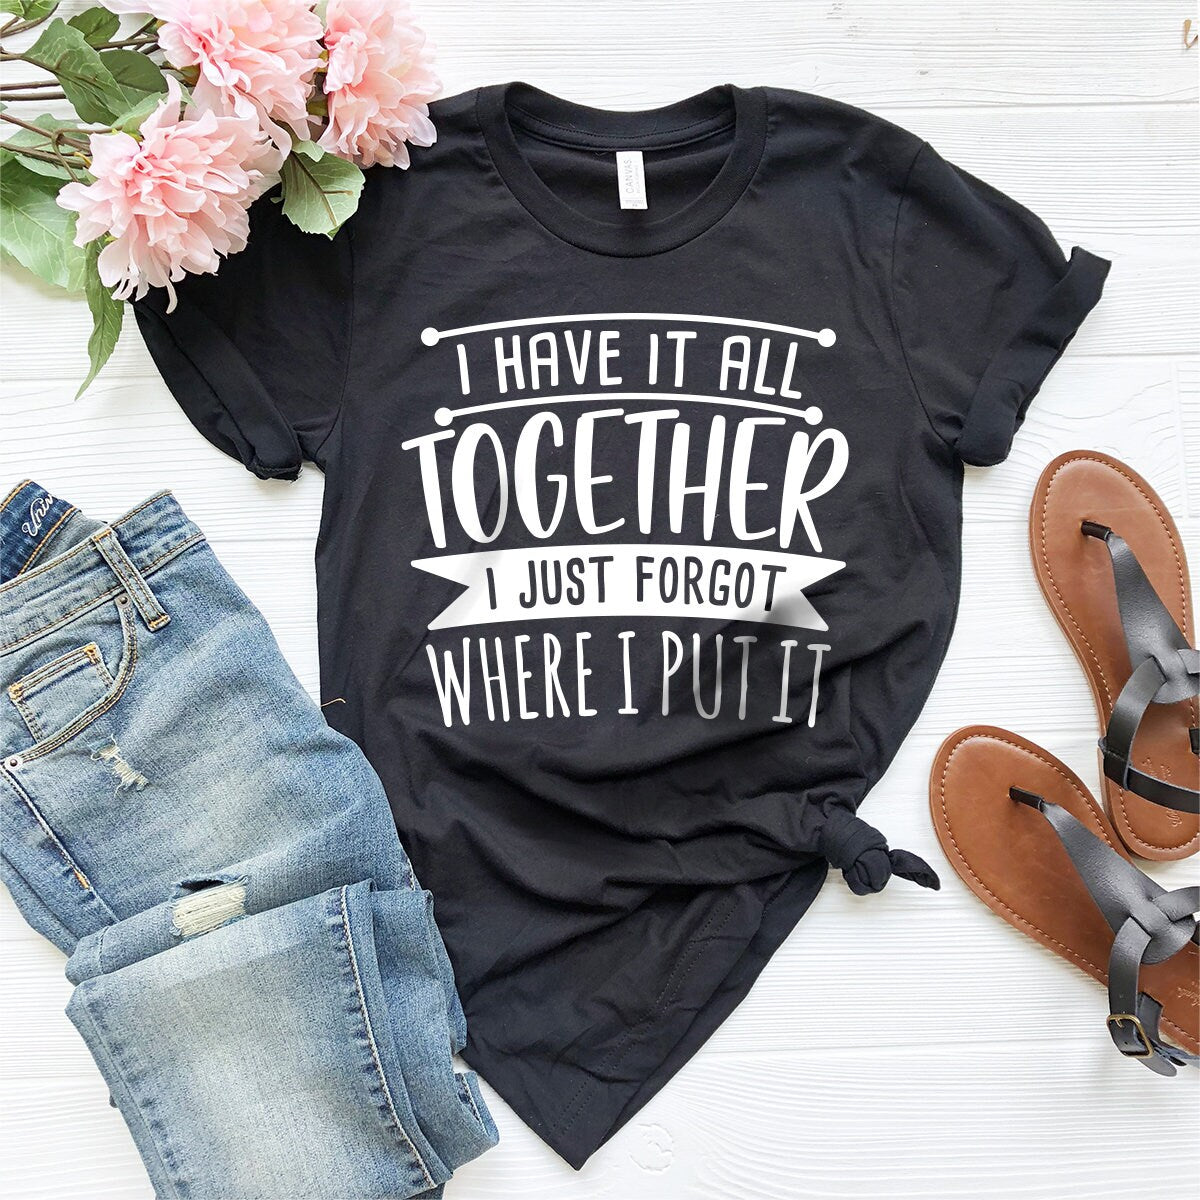 Funny Quote Shirt, Sarcastic Saying Tee, All Together I Just Forgot Where I Put It Shirt, Funny Mom Tees, Don't Remember Shirt - Fastdeliverytees.com